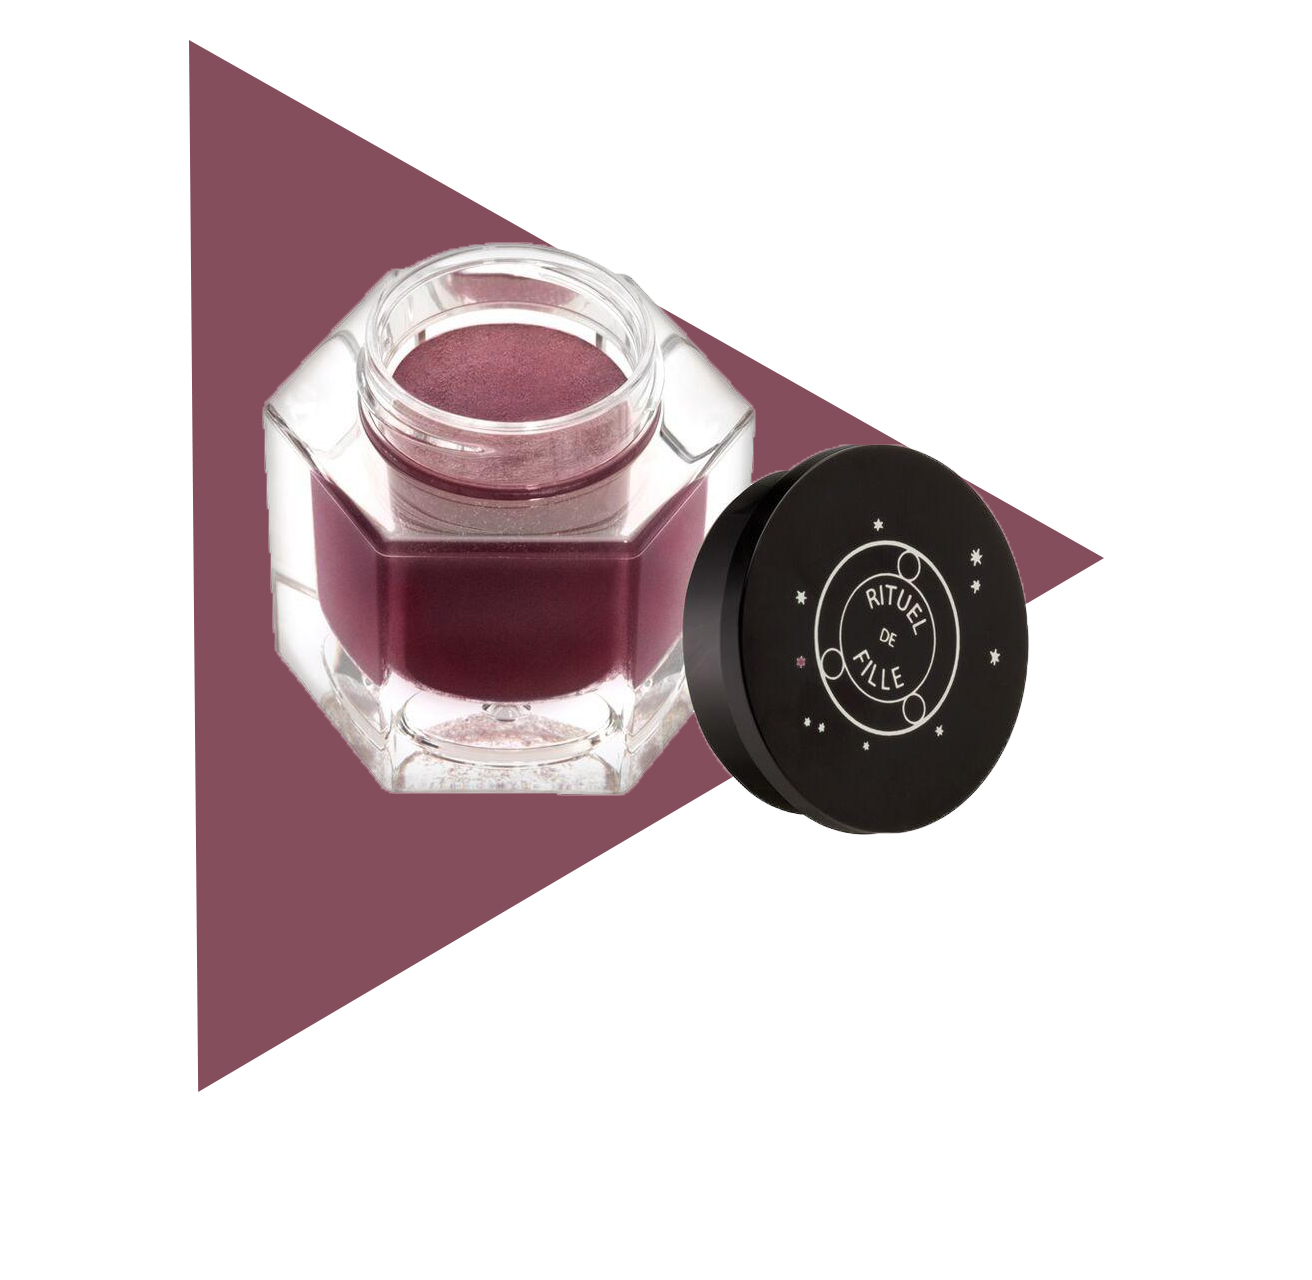 Get to know the beauty Rituel de Fille